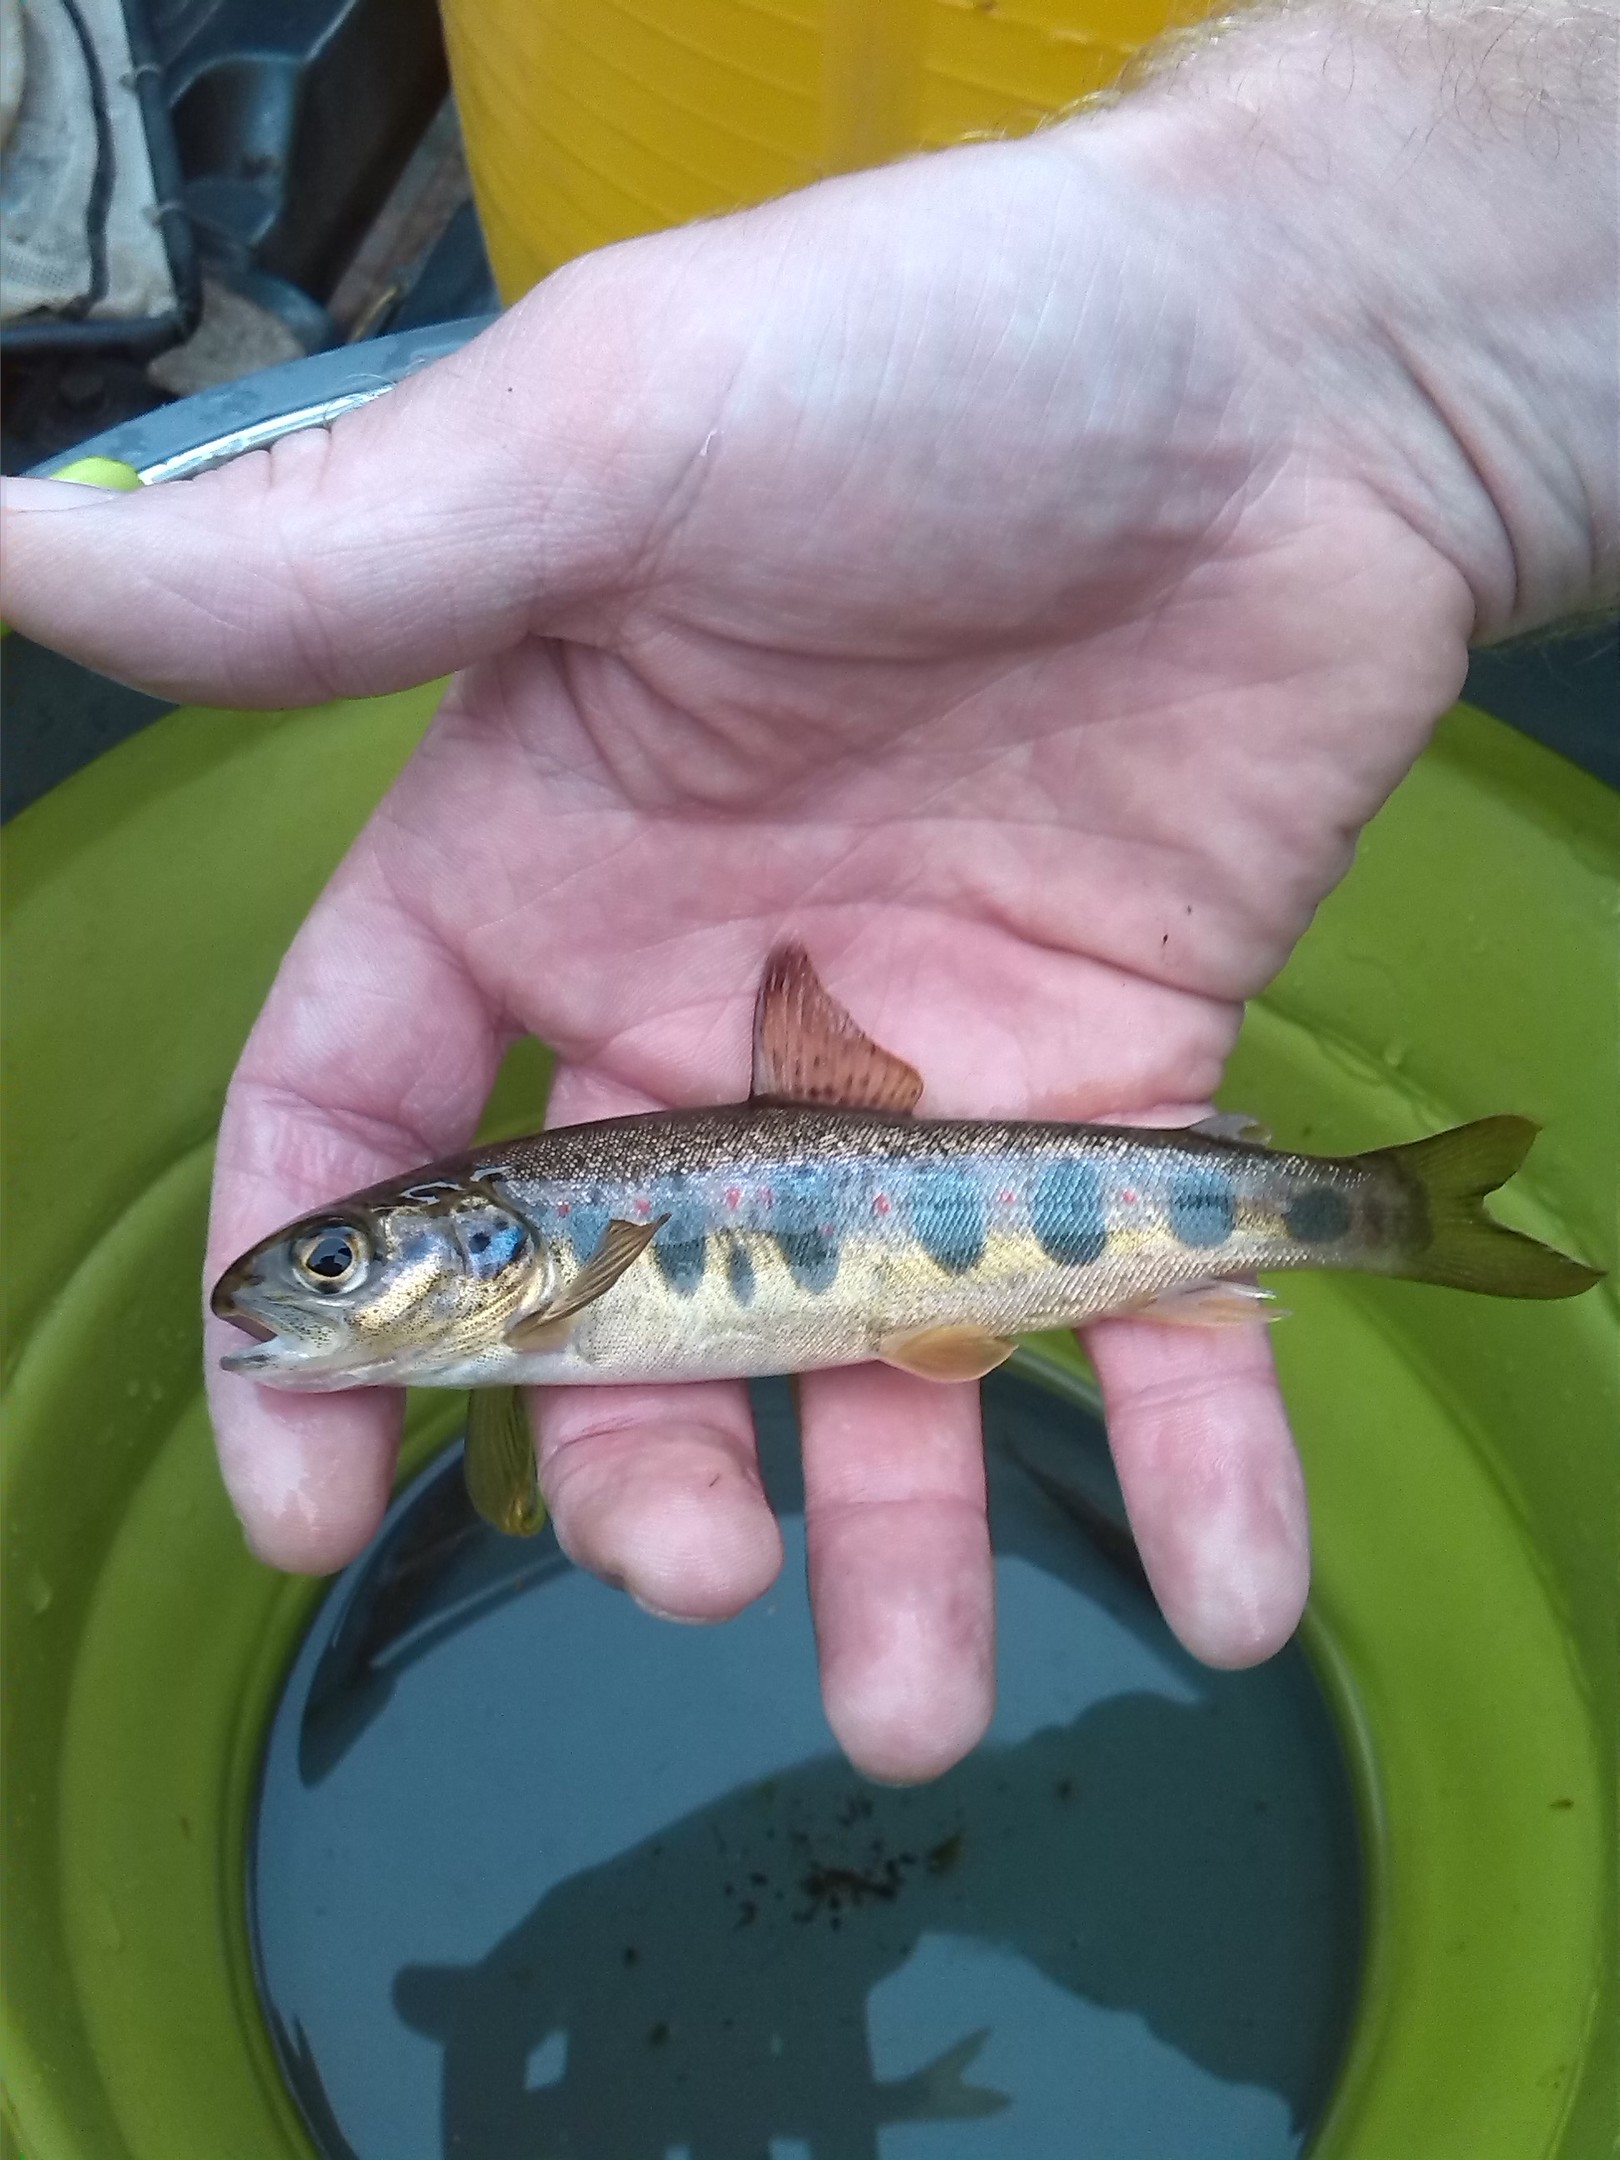 A typical Ness system juvenile salmon